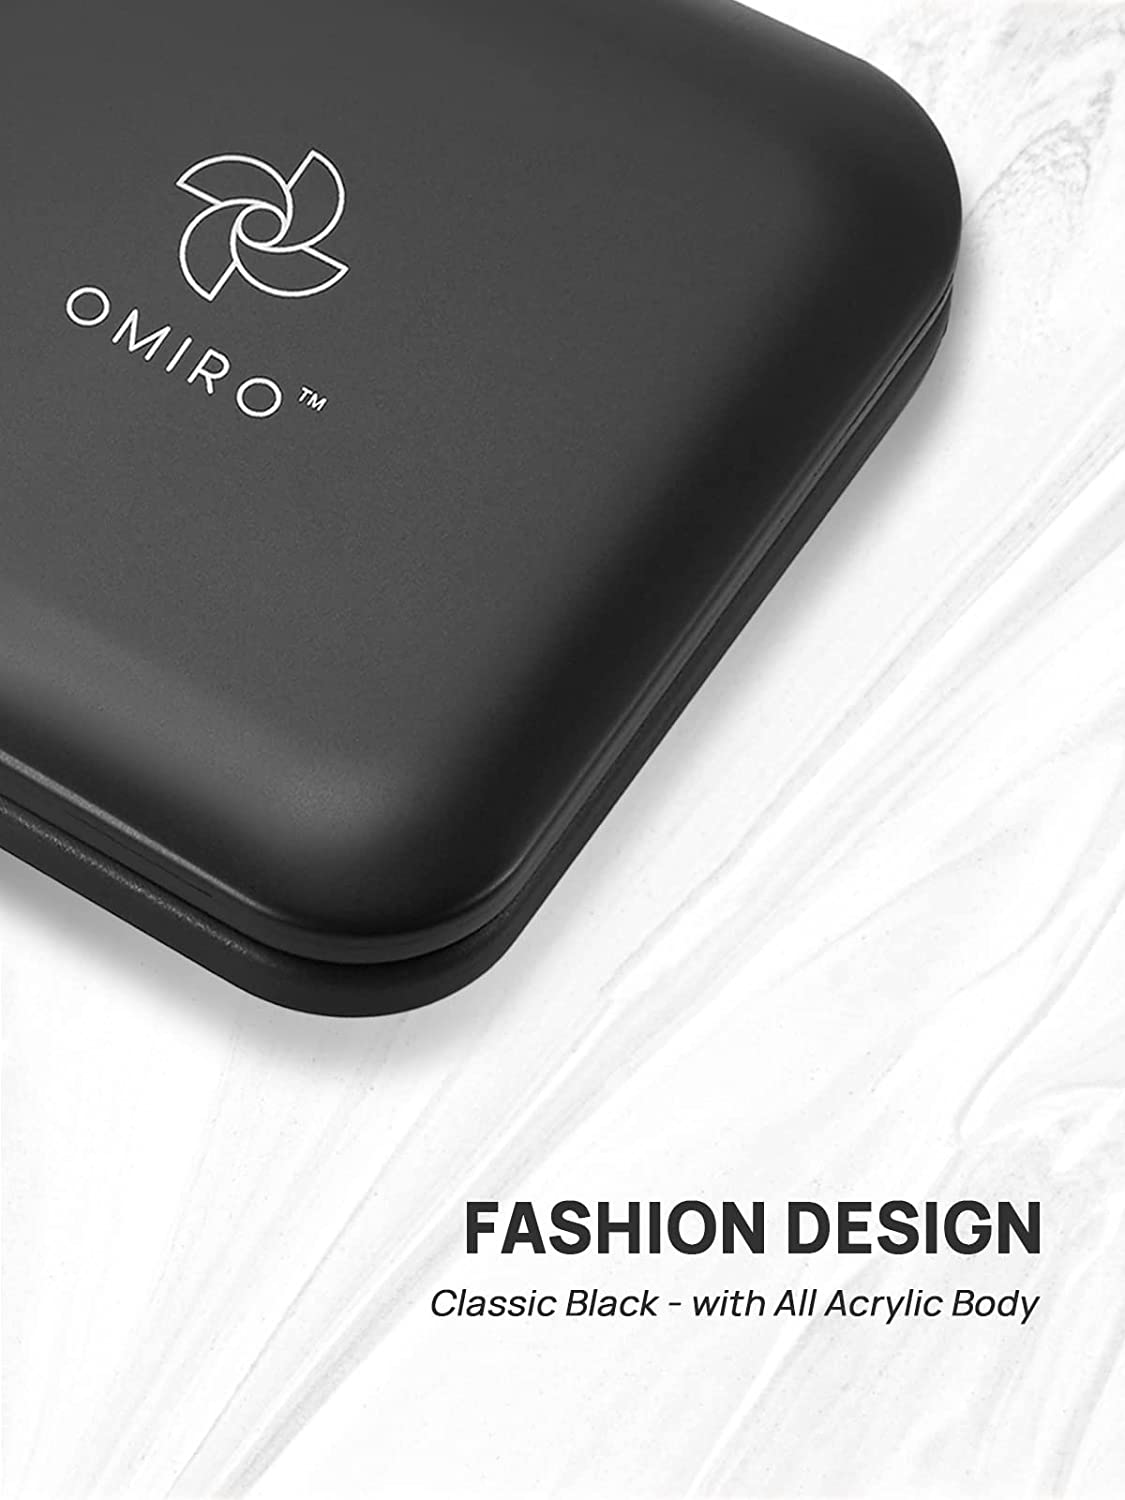 OMIRO Folding Compact Mirror, 1X/10X Magnification 3½” Pocket Size Square Hand Mirror for Travel Makeup (Black)